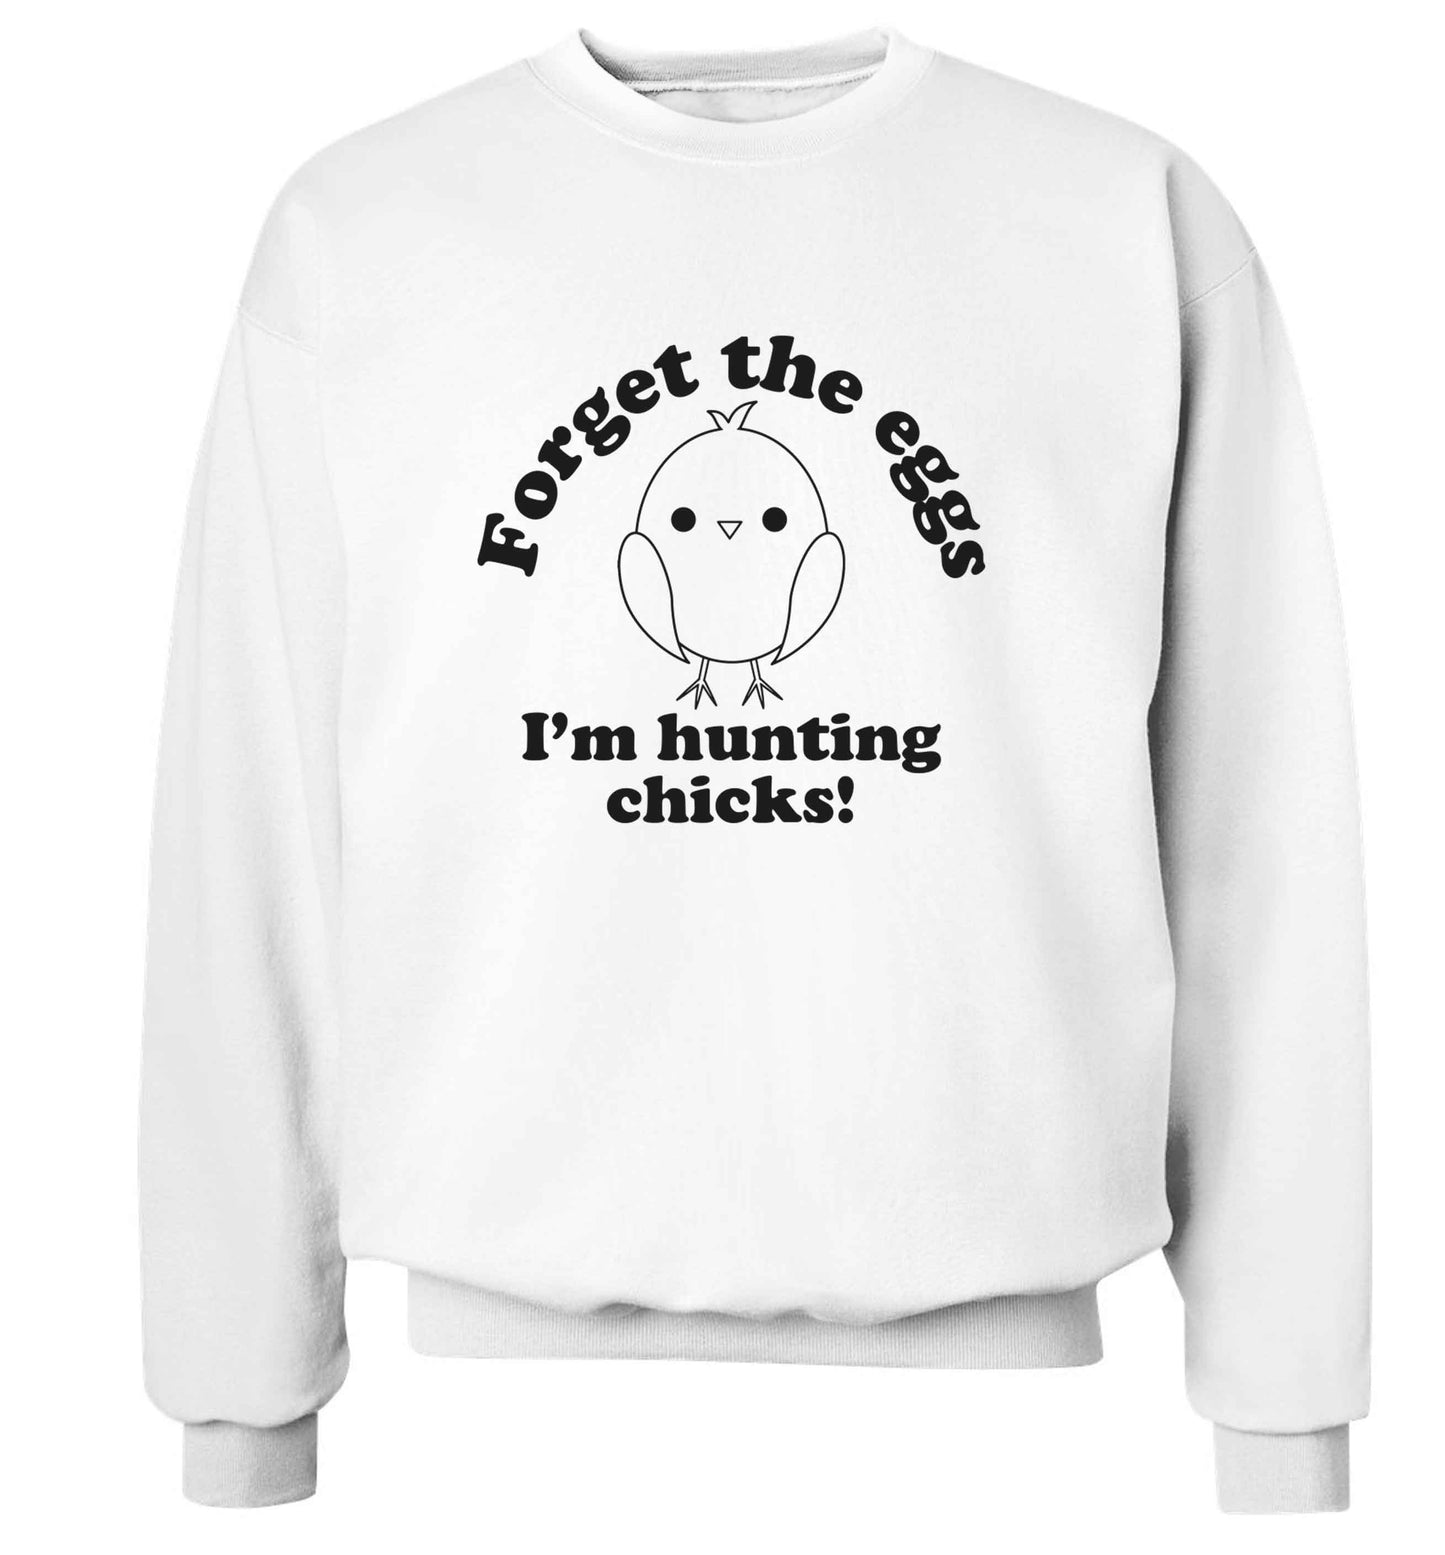 Forget the eggs I'm hunting chicks! adult's unisex white sweater 2XL